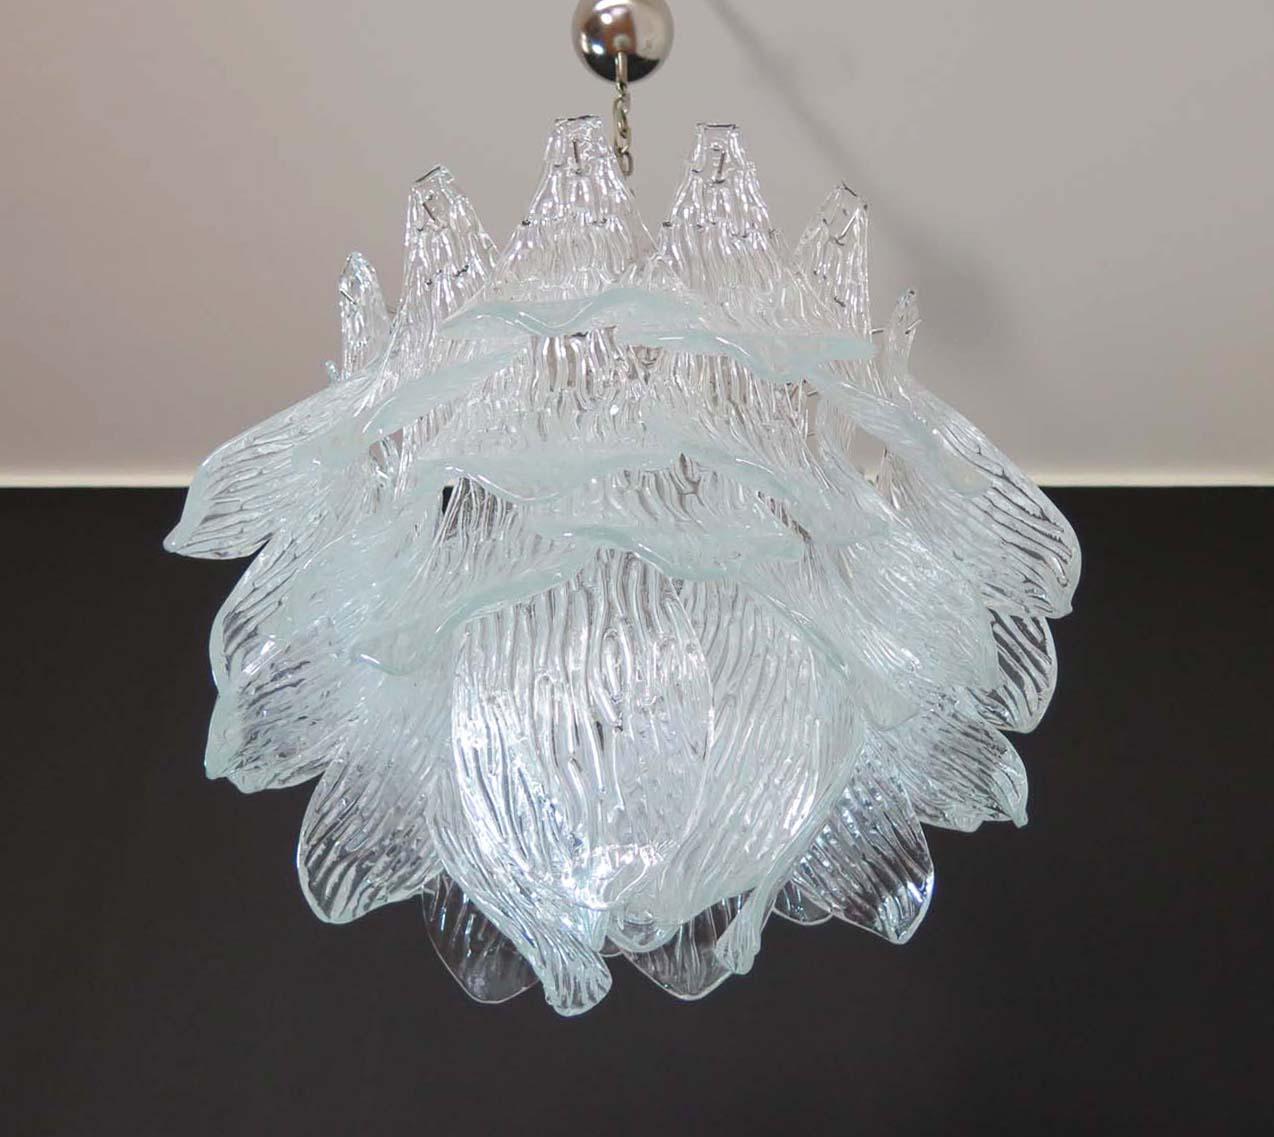 Beautiful and huge Italian Murano chandelier composed of 38 splendid trasparent glasses that give a very elegant look. The glasses of this chandelier are real works of art. This chandelier is shaped like a blossoming flower.
Period: